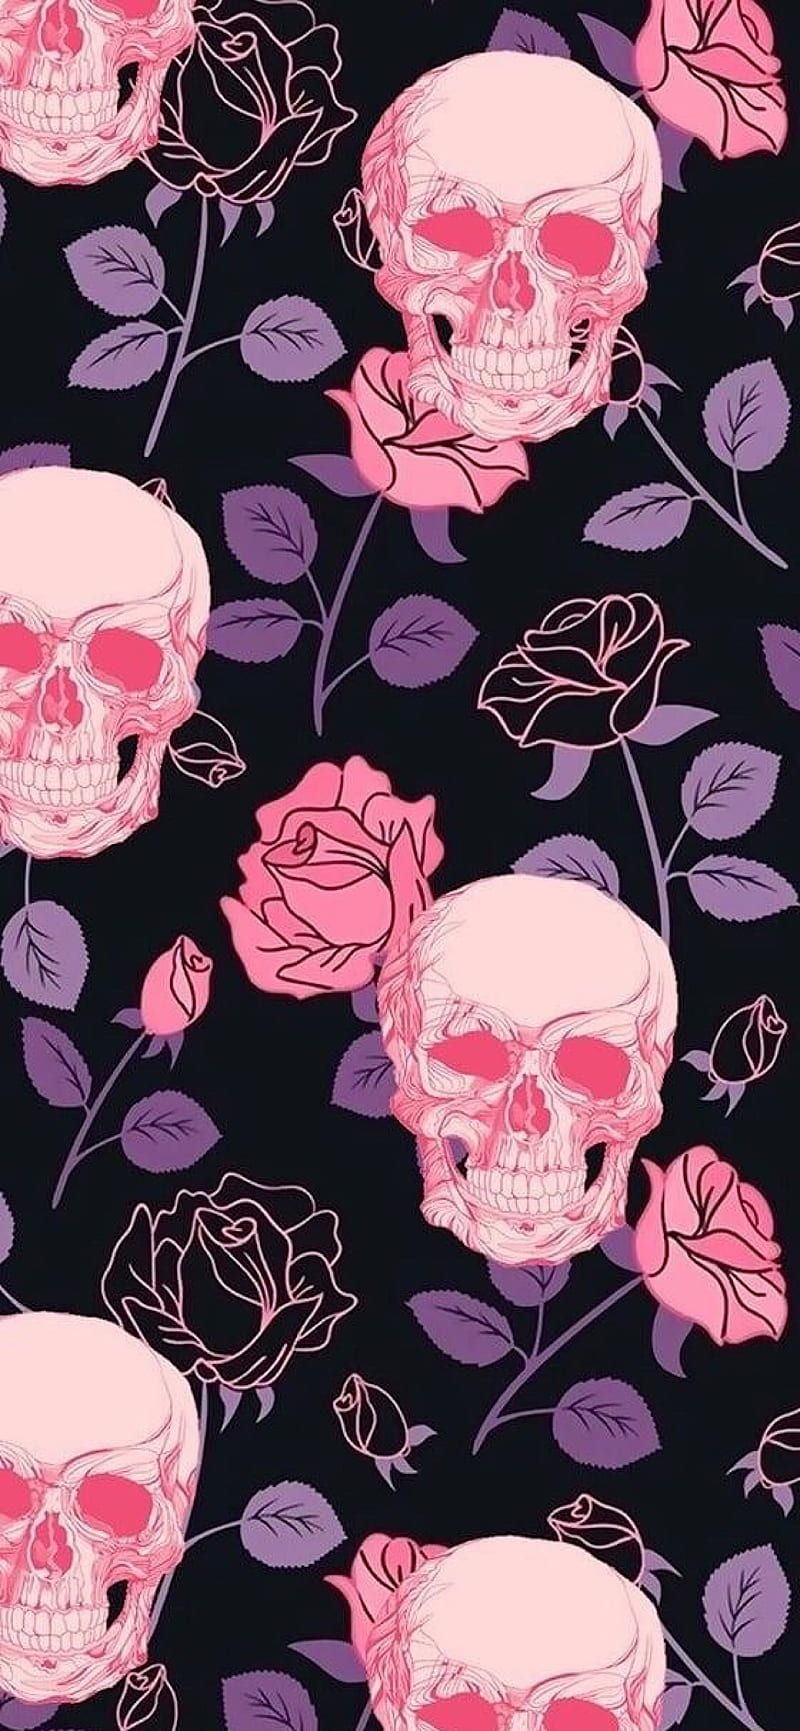 Wallpaper with skulls and roses, in pink and purple, on a black background - Skull